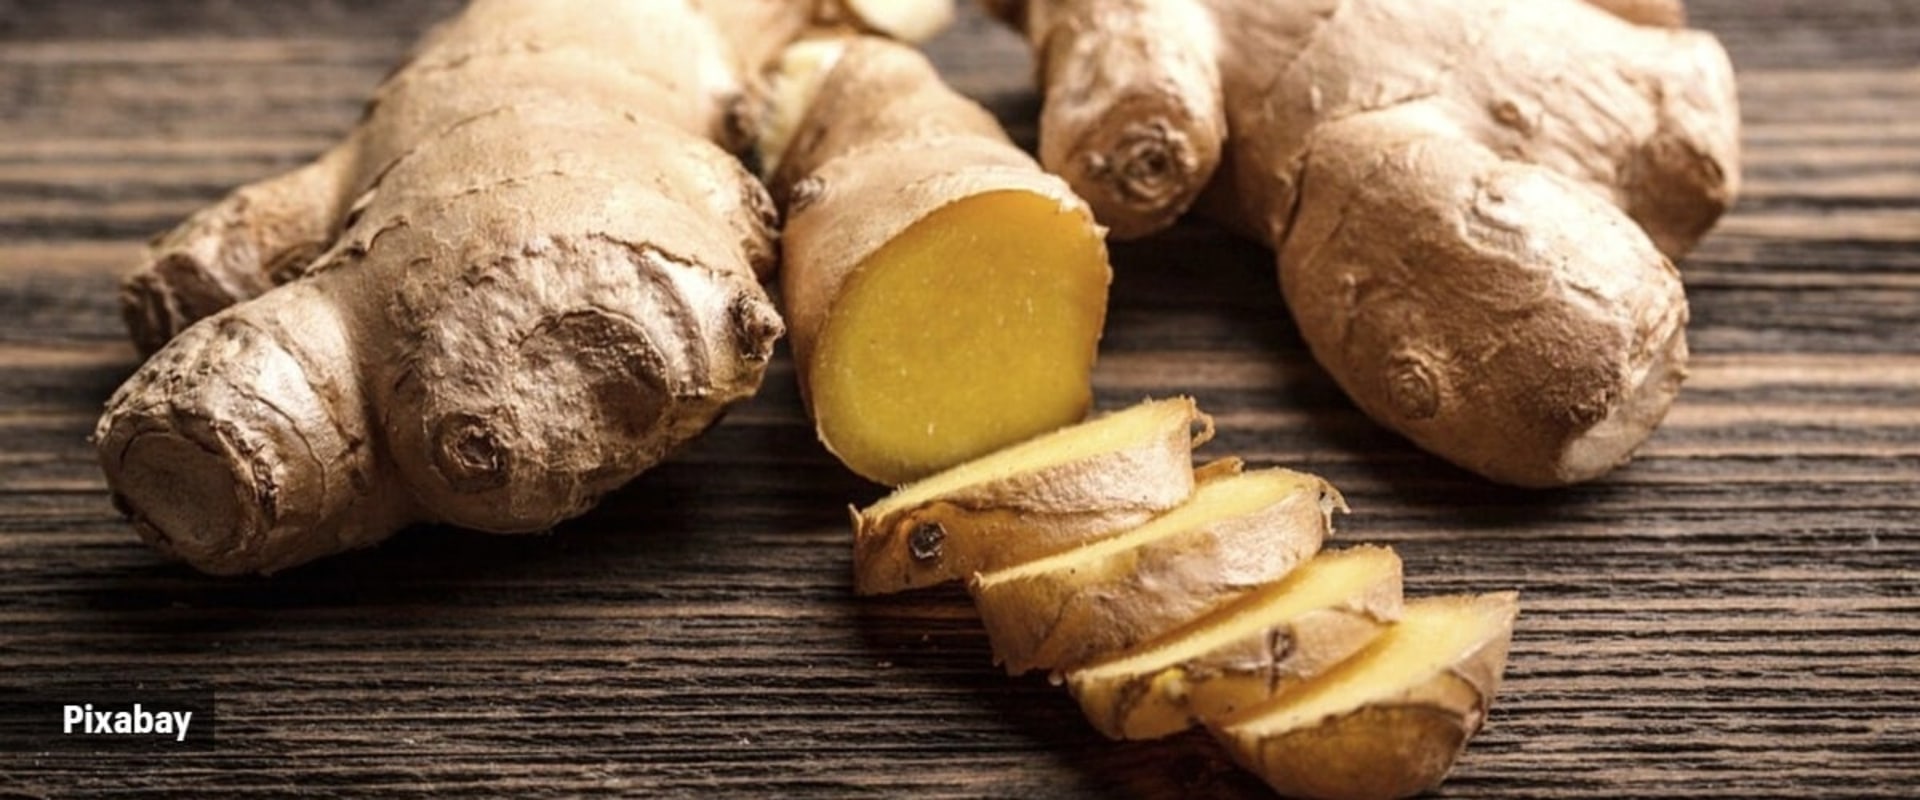 Does Ginger Help You Stay Warm?